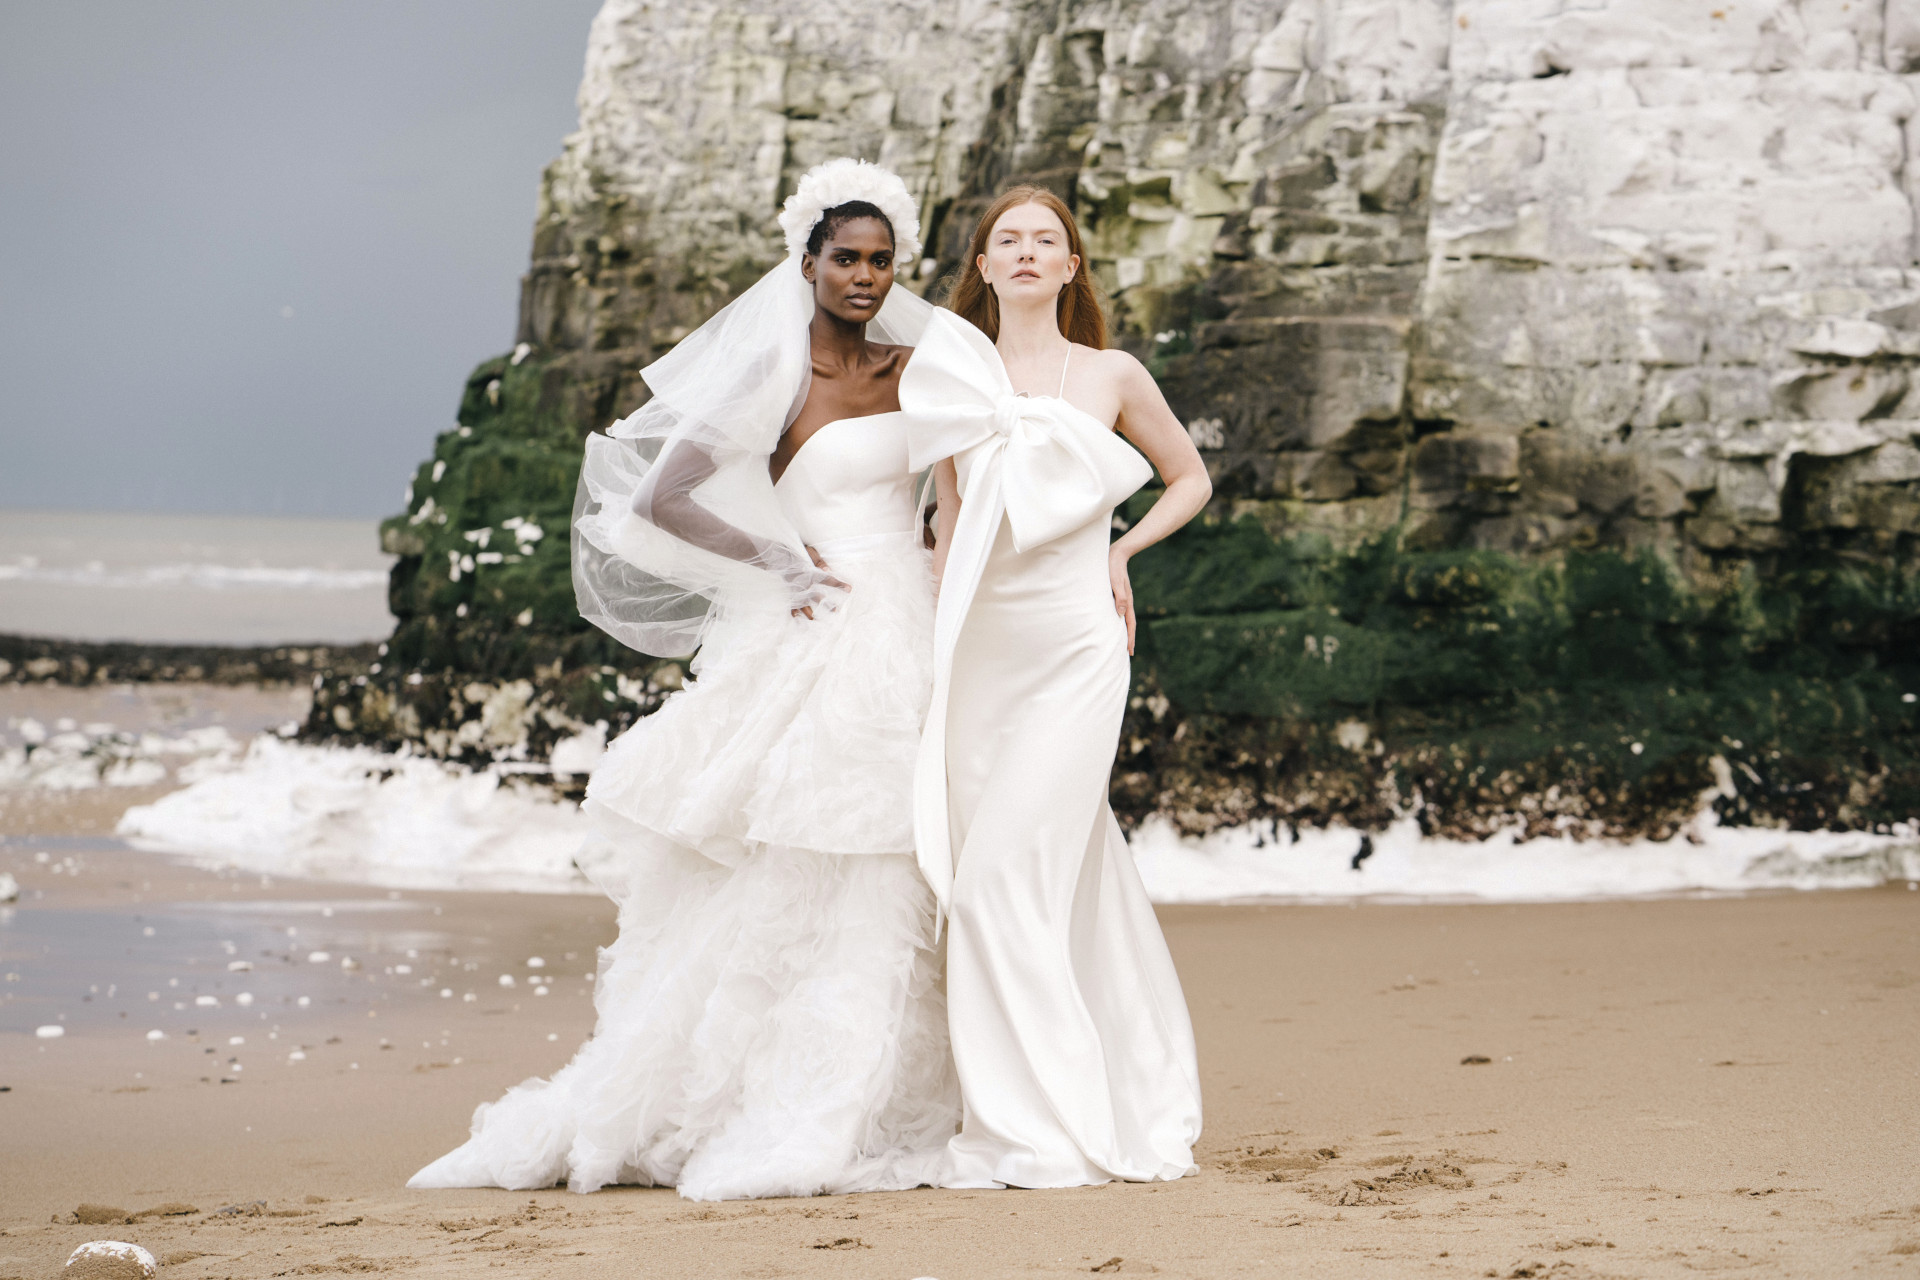 Models in wedding dresses on the beach